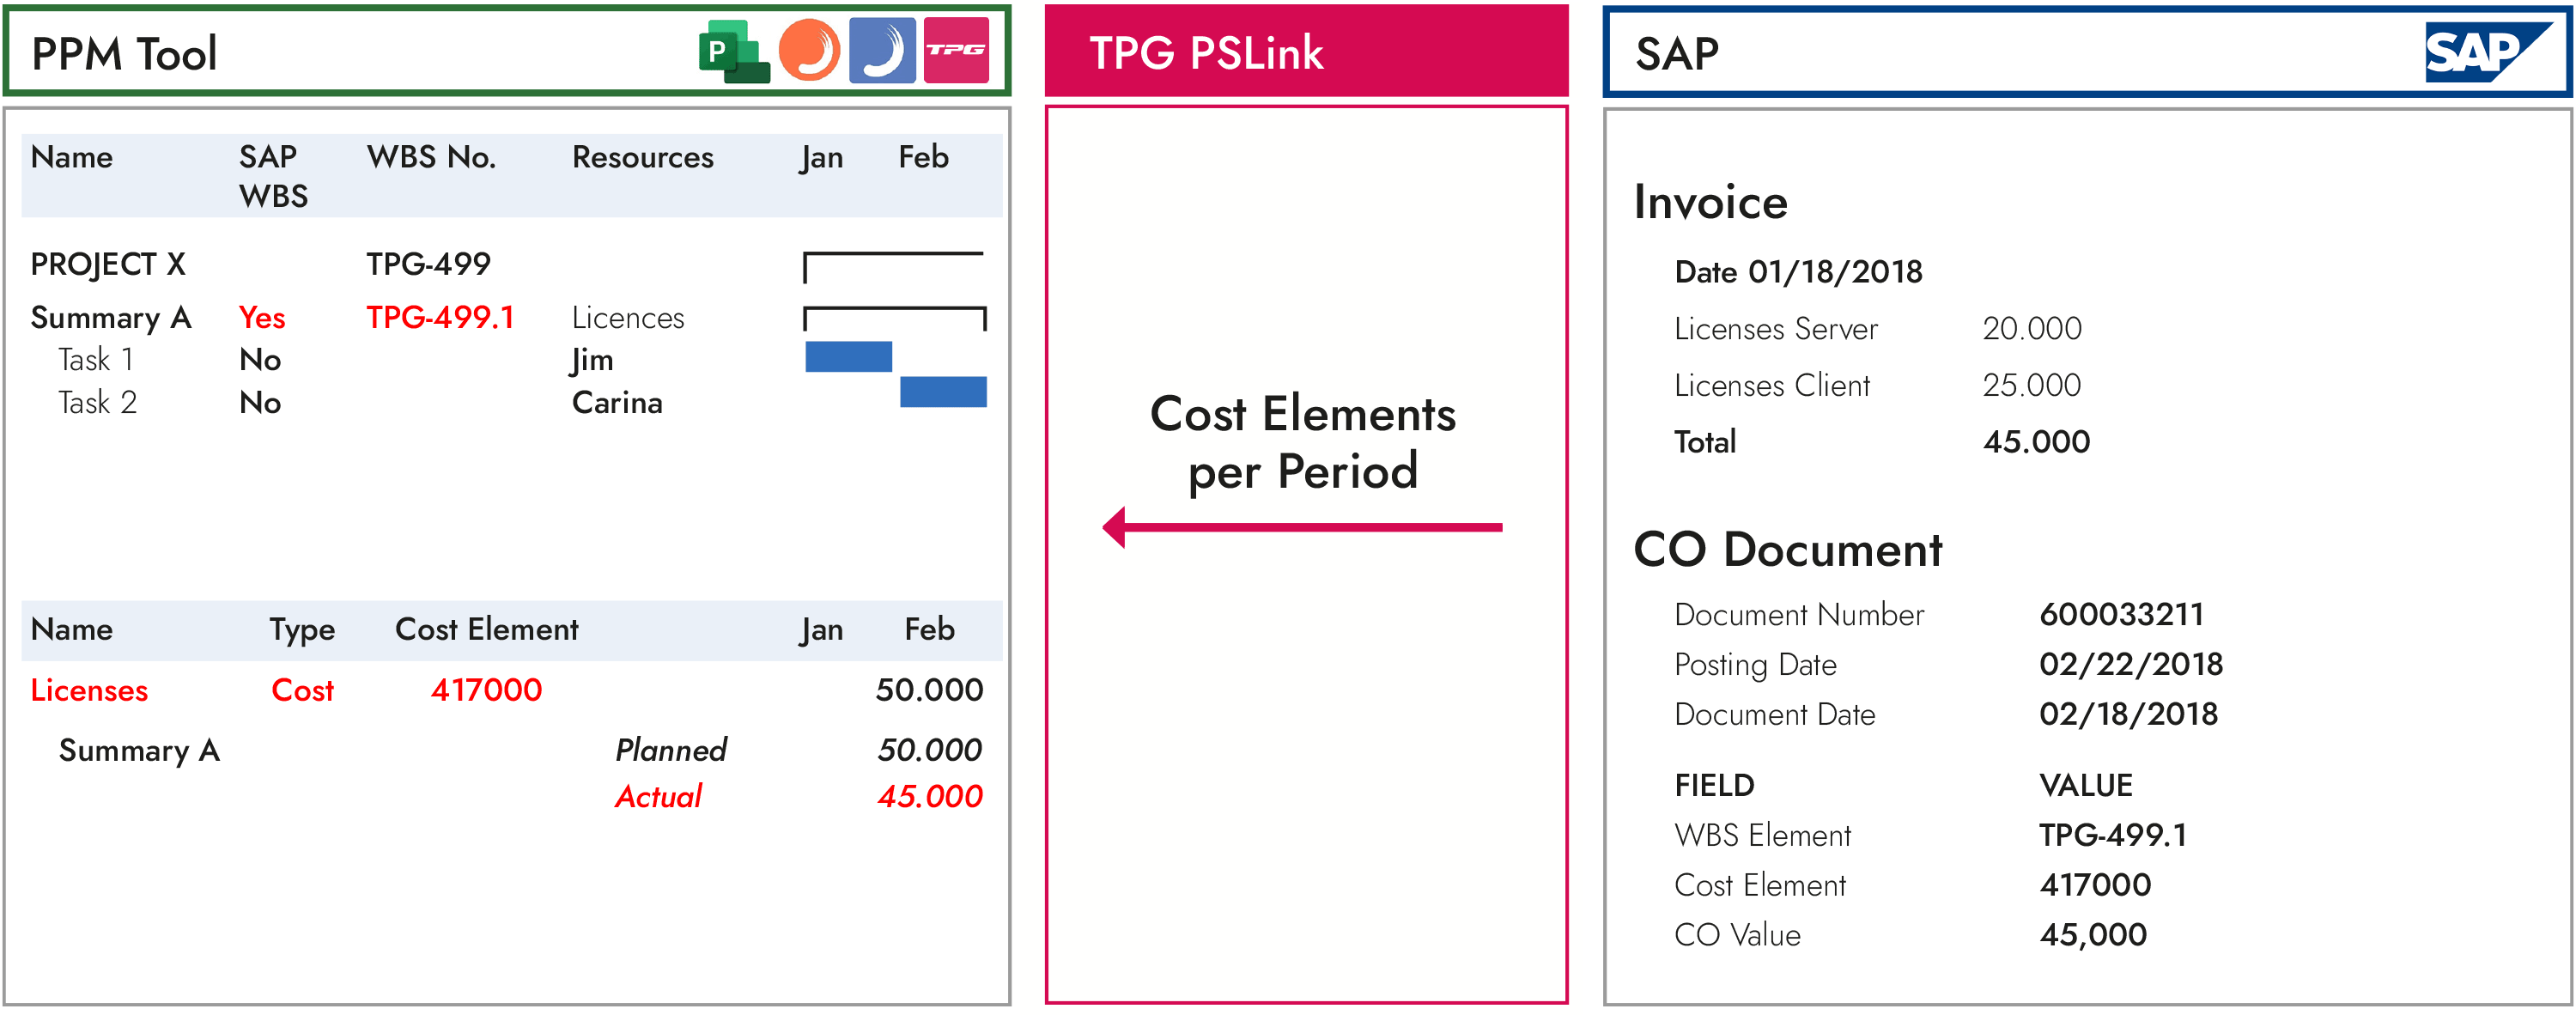 Transfer of invoice data from SAP to PPM